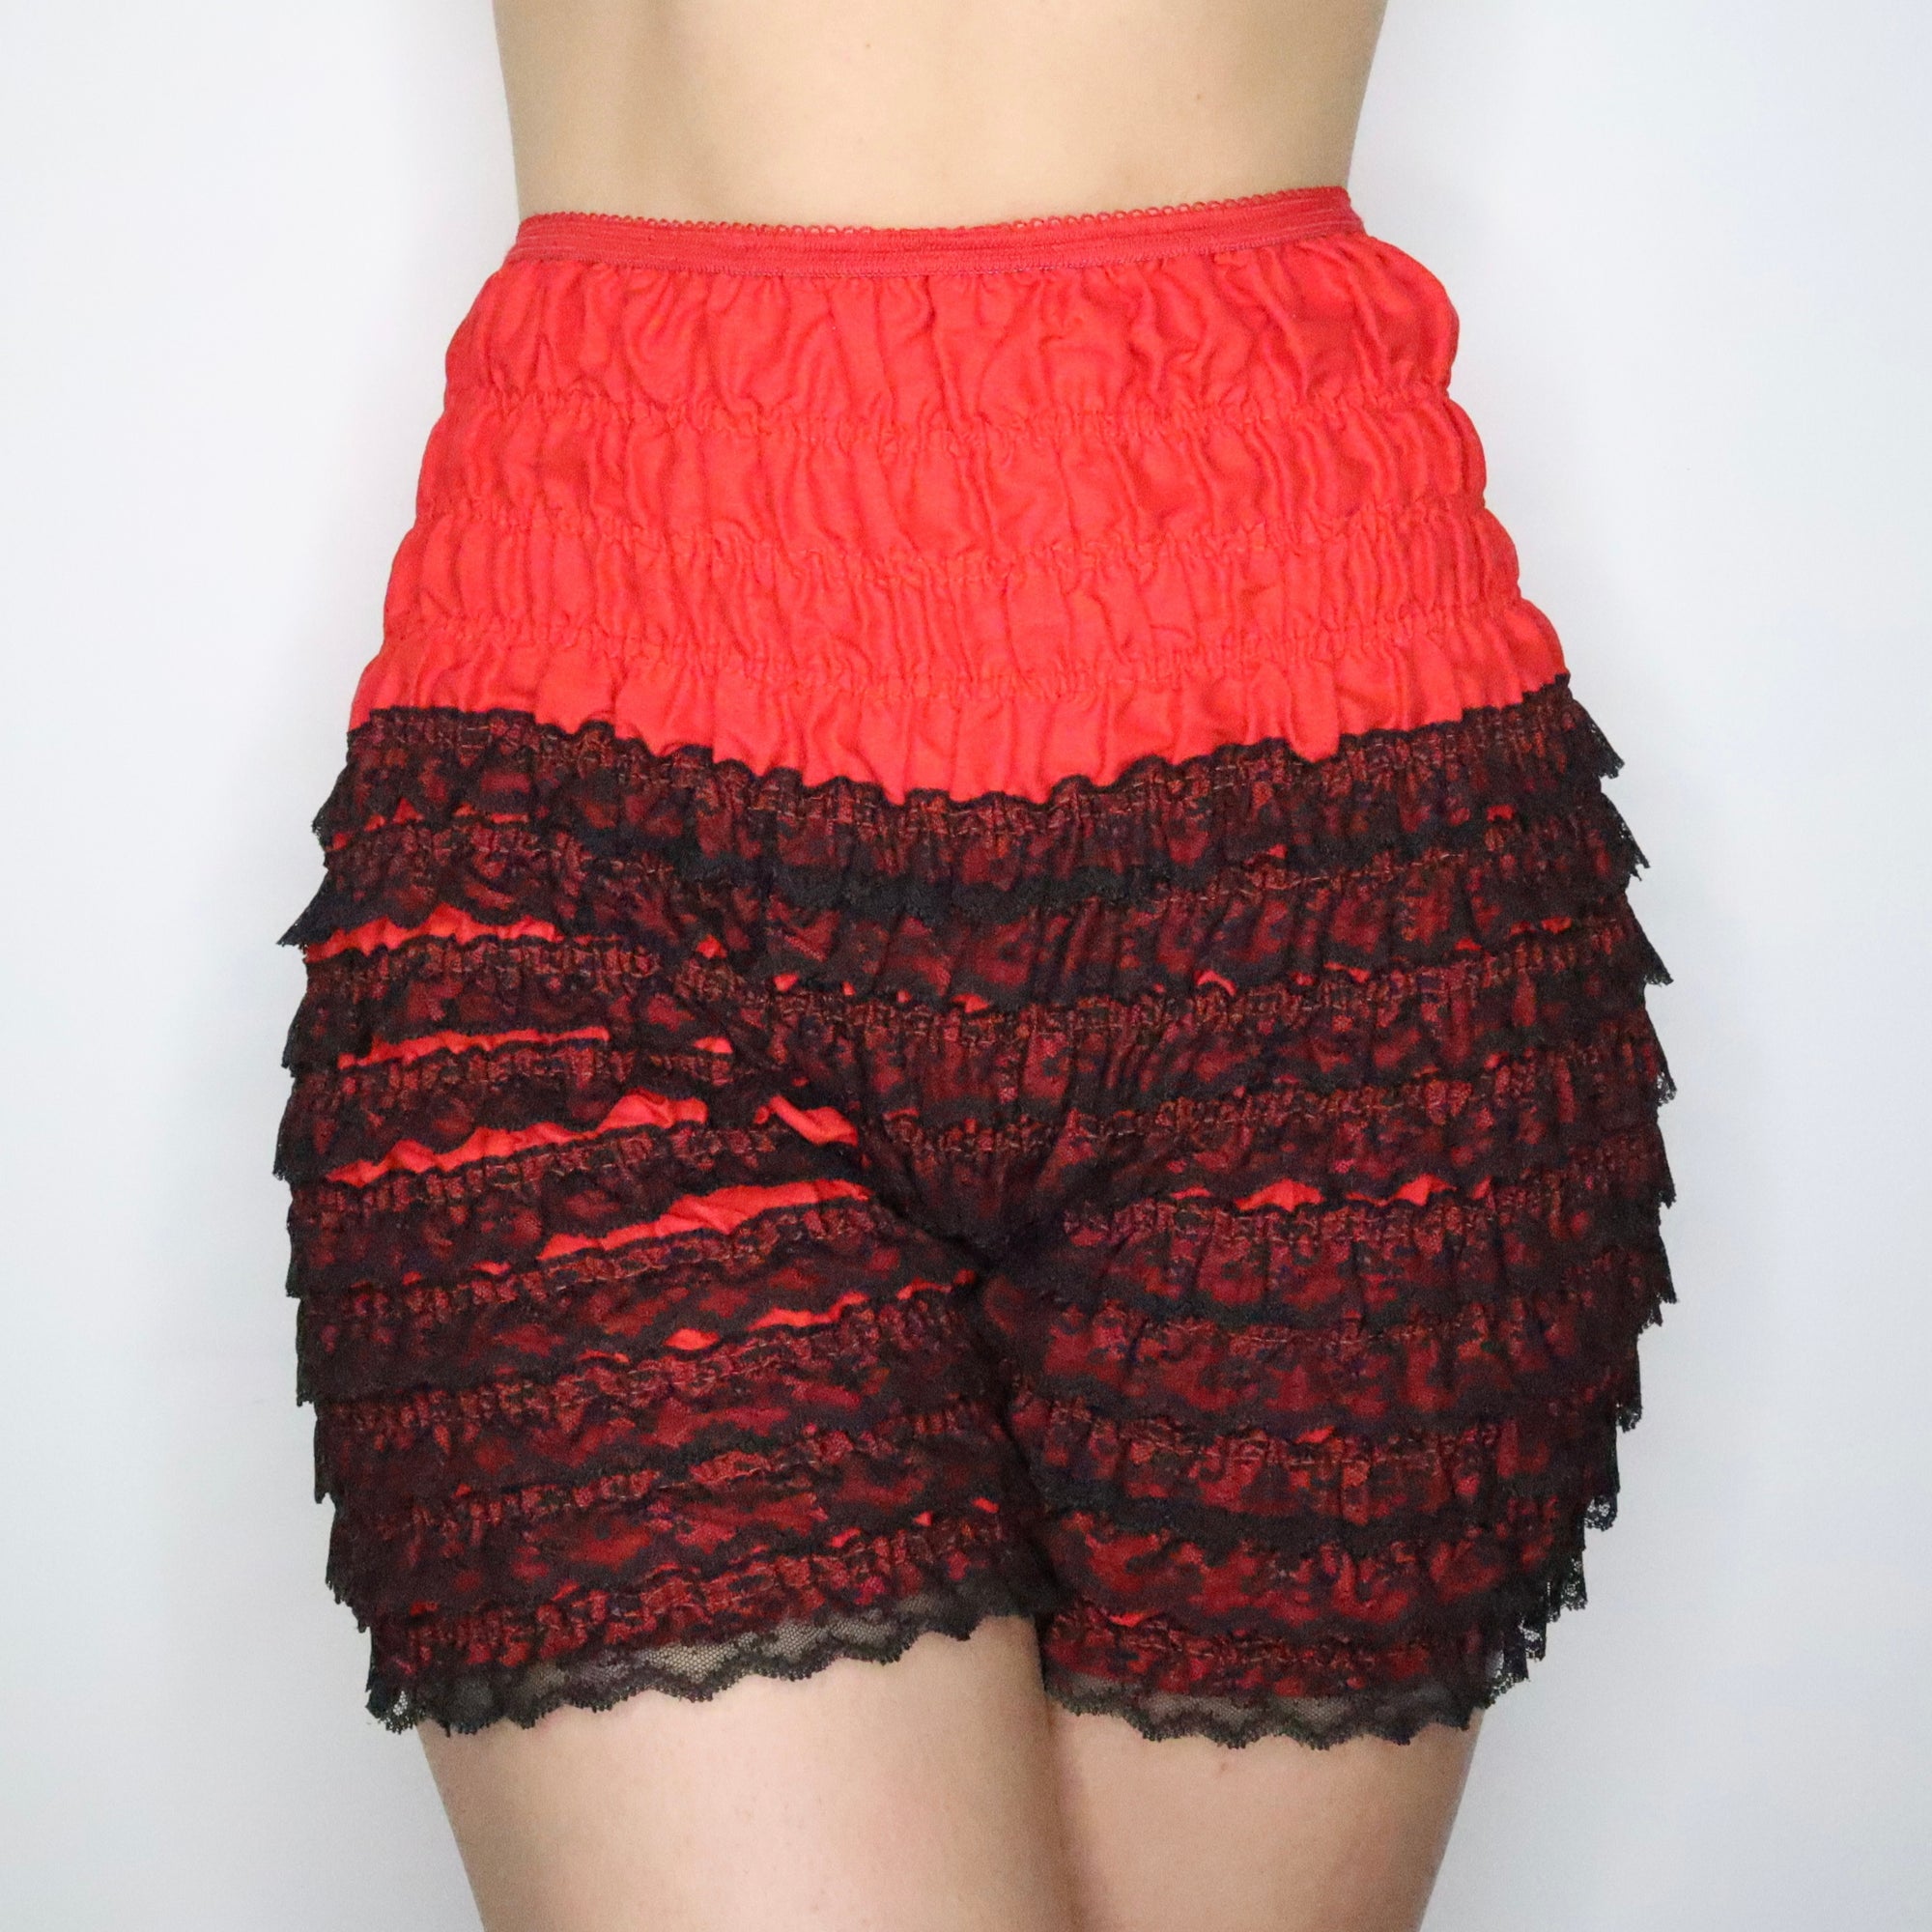 Red Ruffle Lace Bloomers (Small)